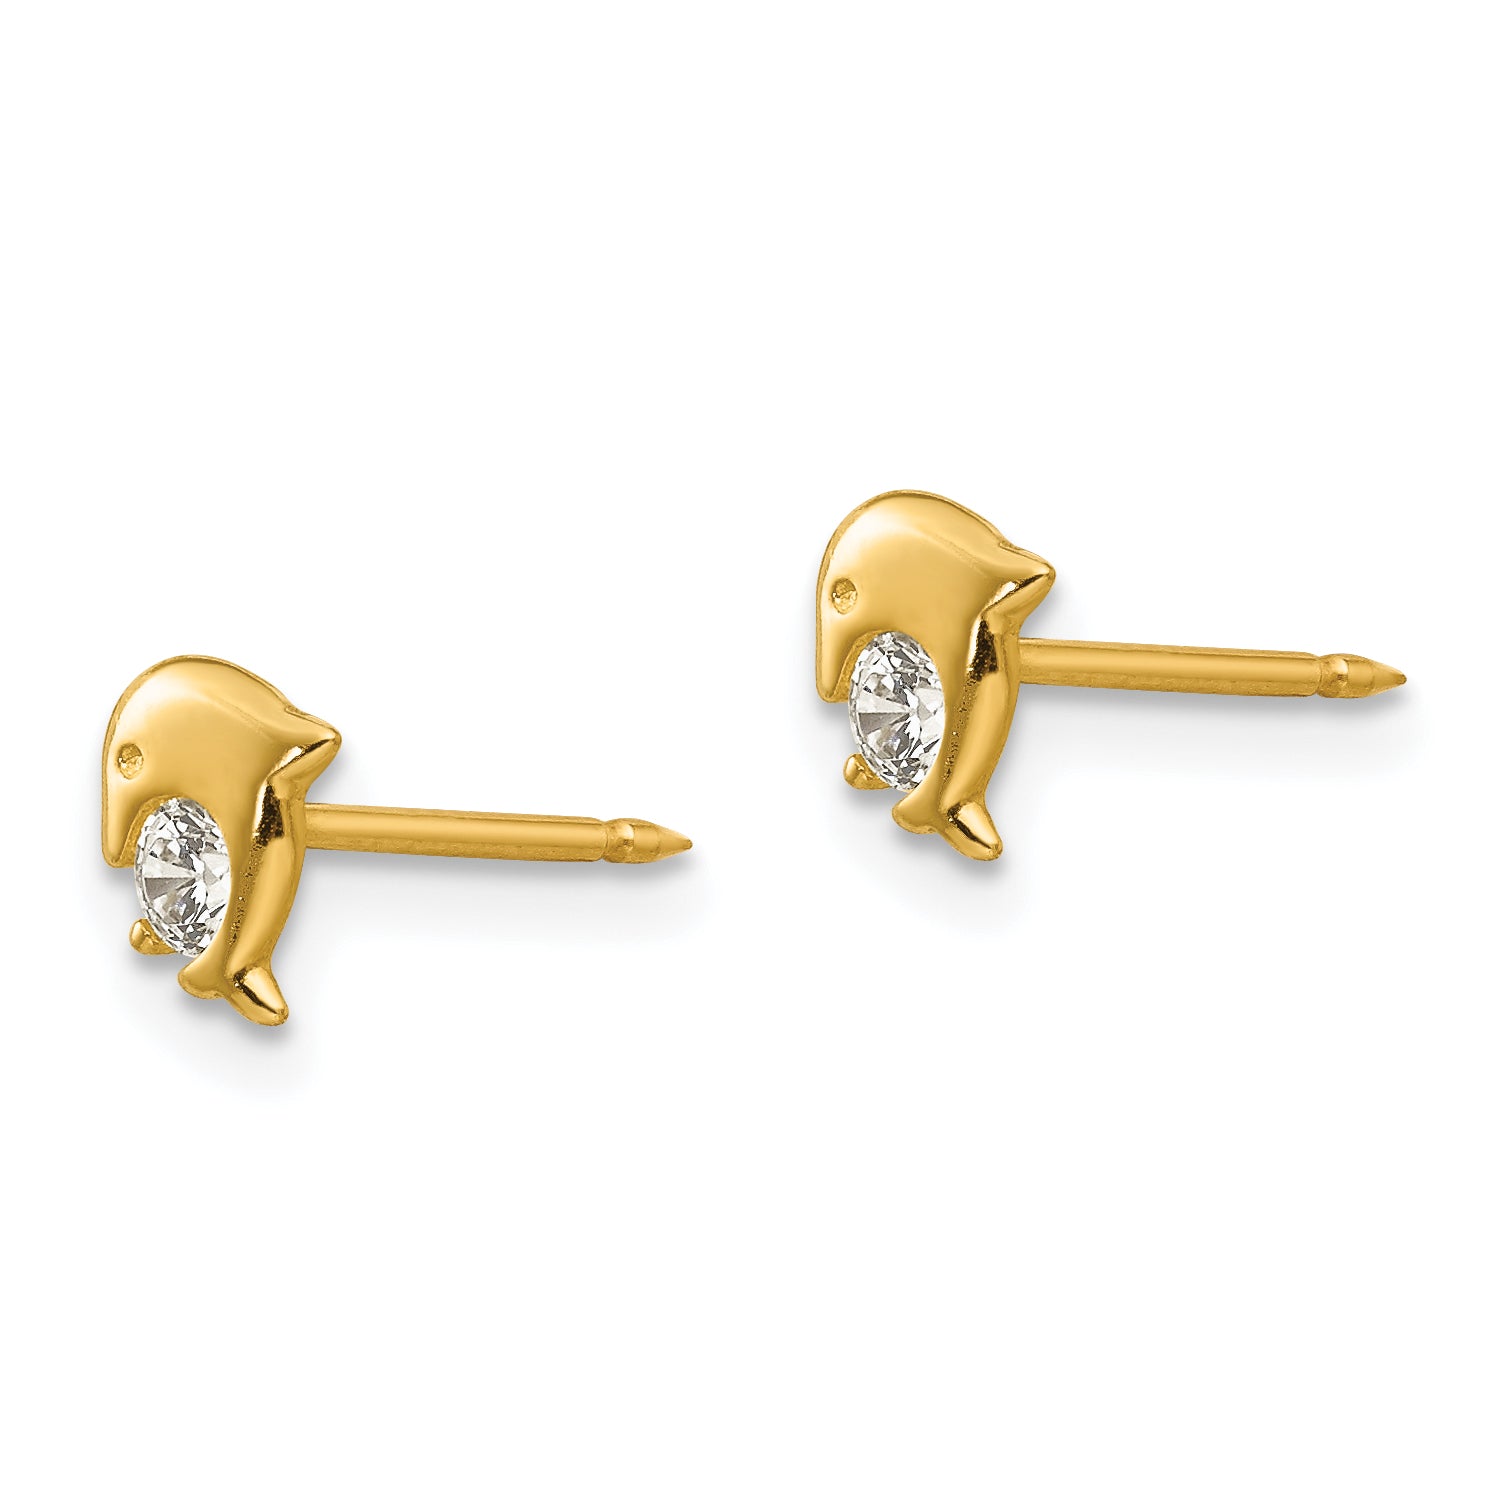 Inverness 14k Dolphin CZ Earrings